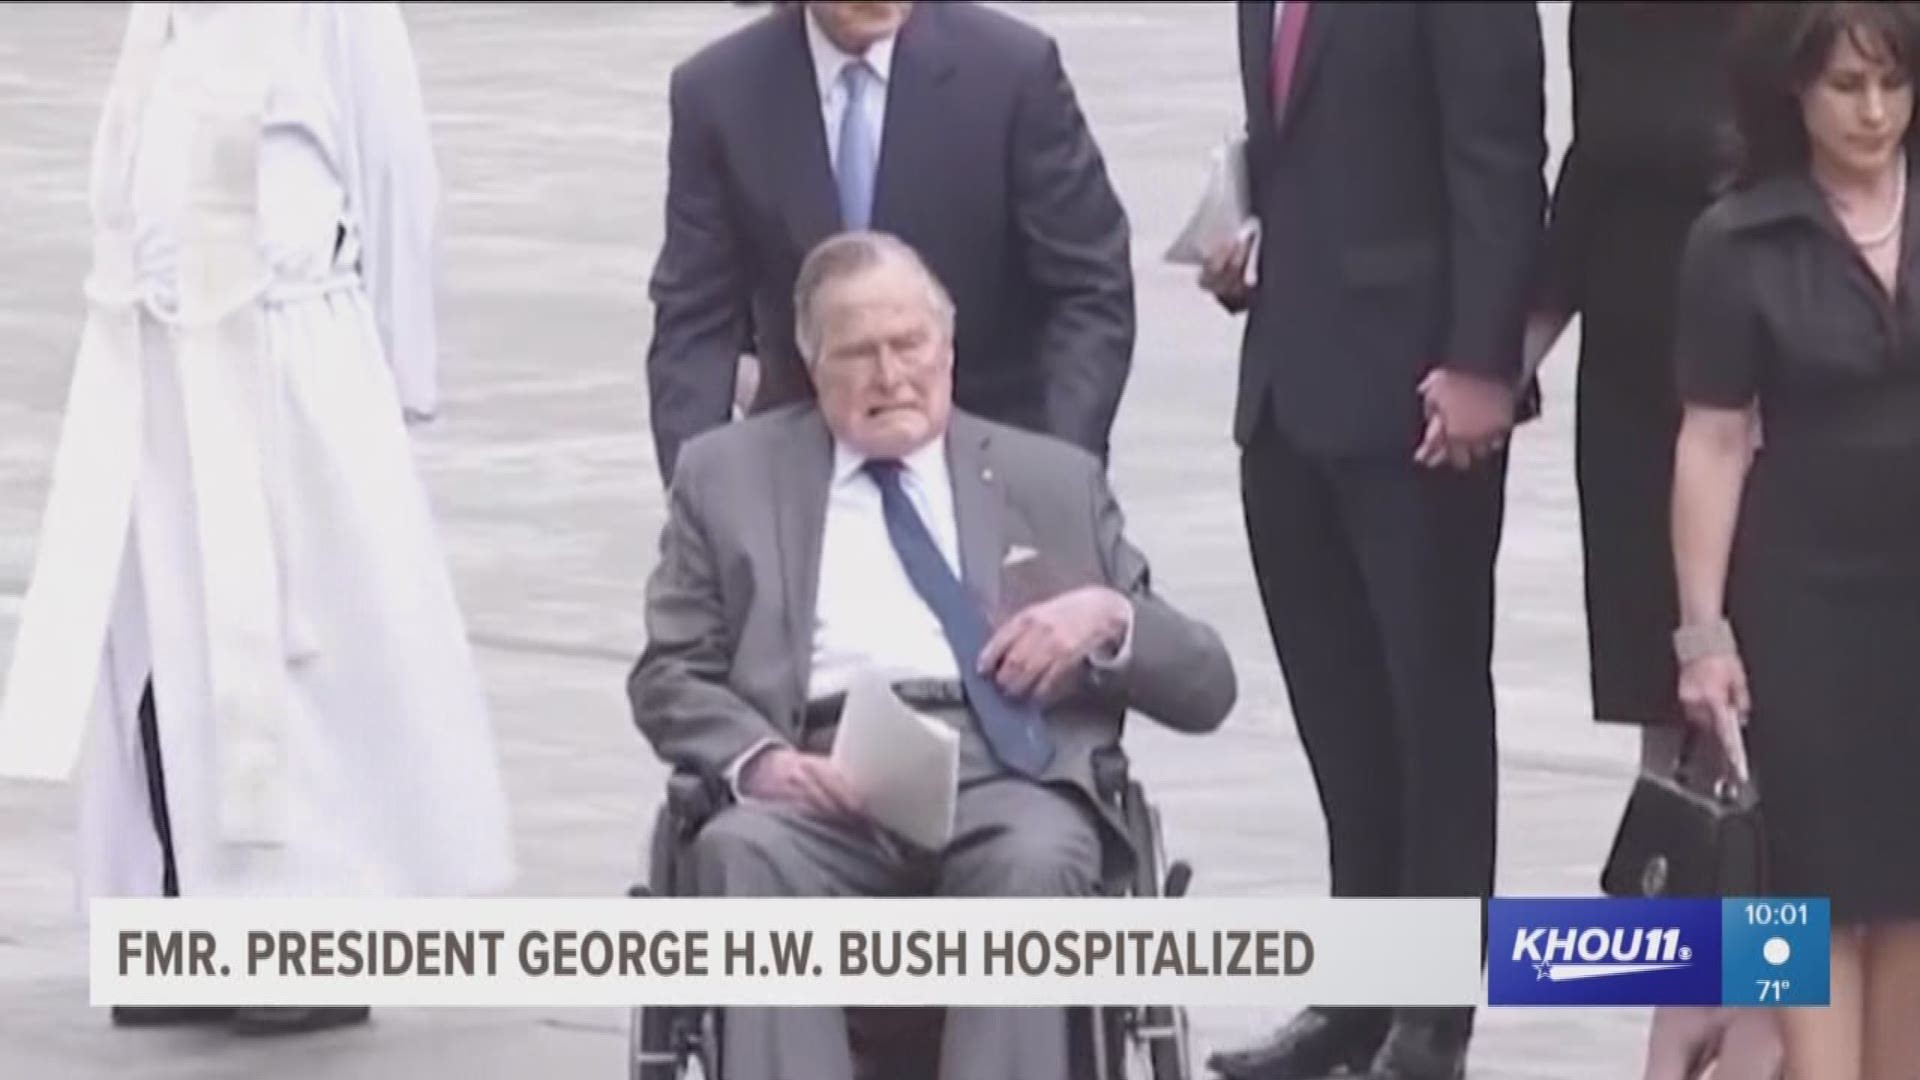 President George H.W. Bush has been hospitalized after contracting an infection that spread to his blood.